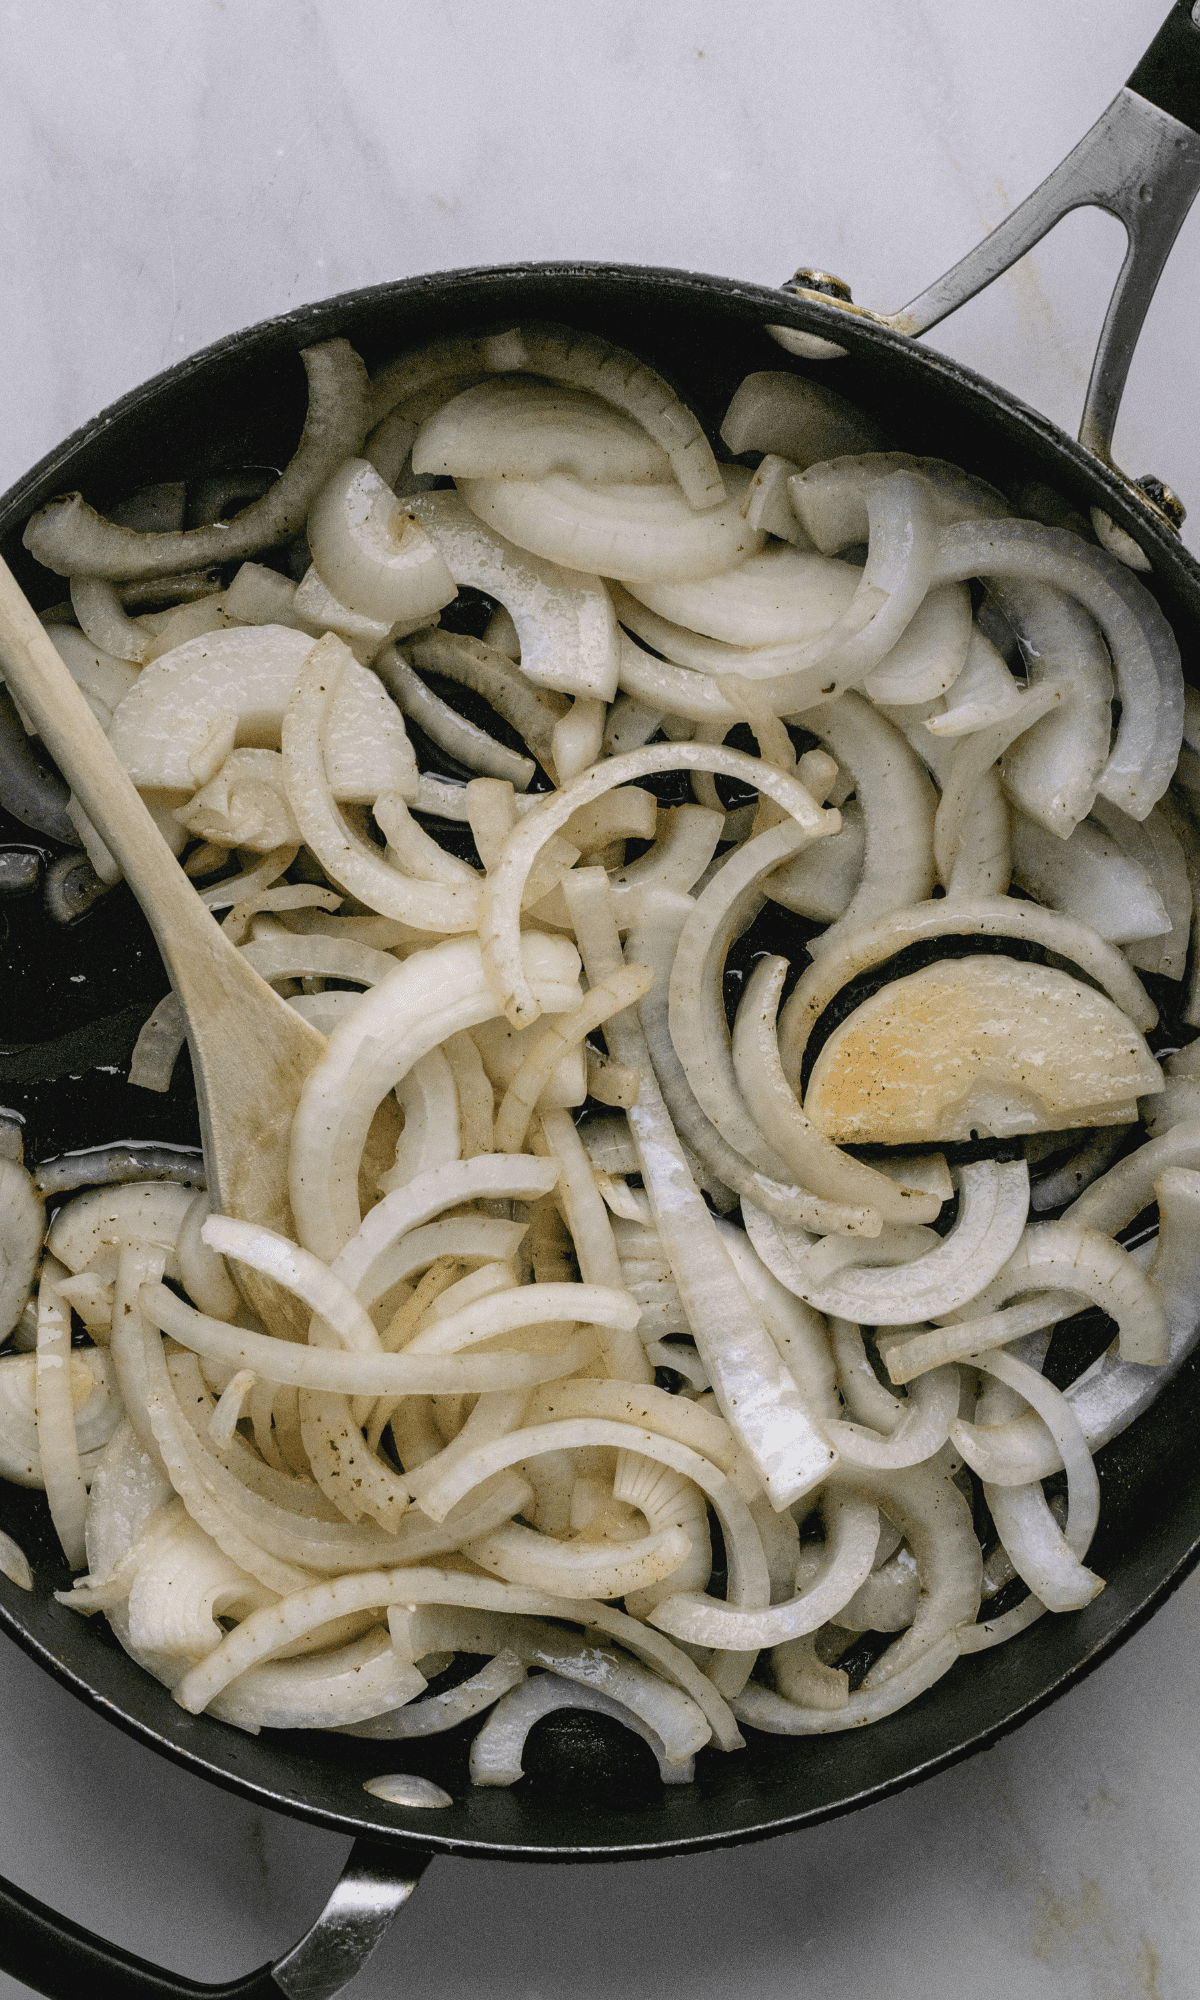 Uncooked onions in skillet.